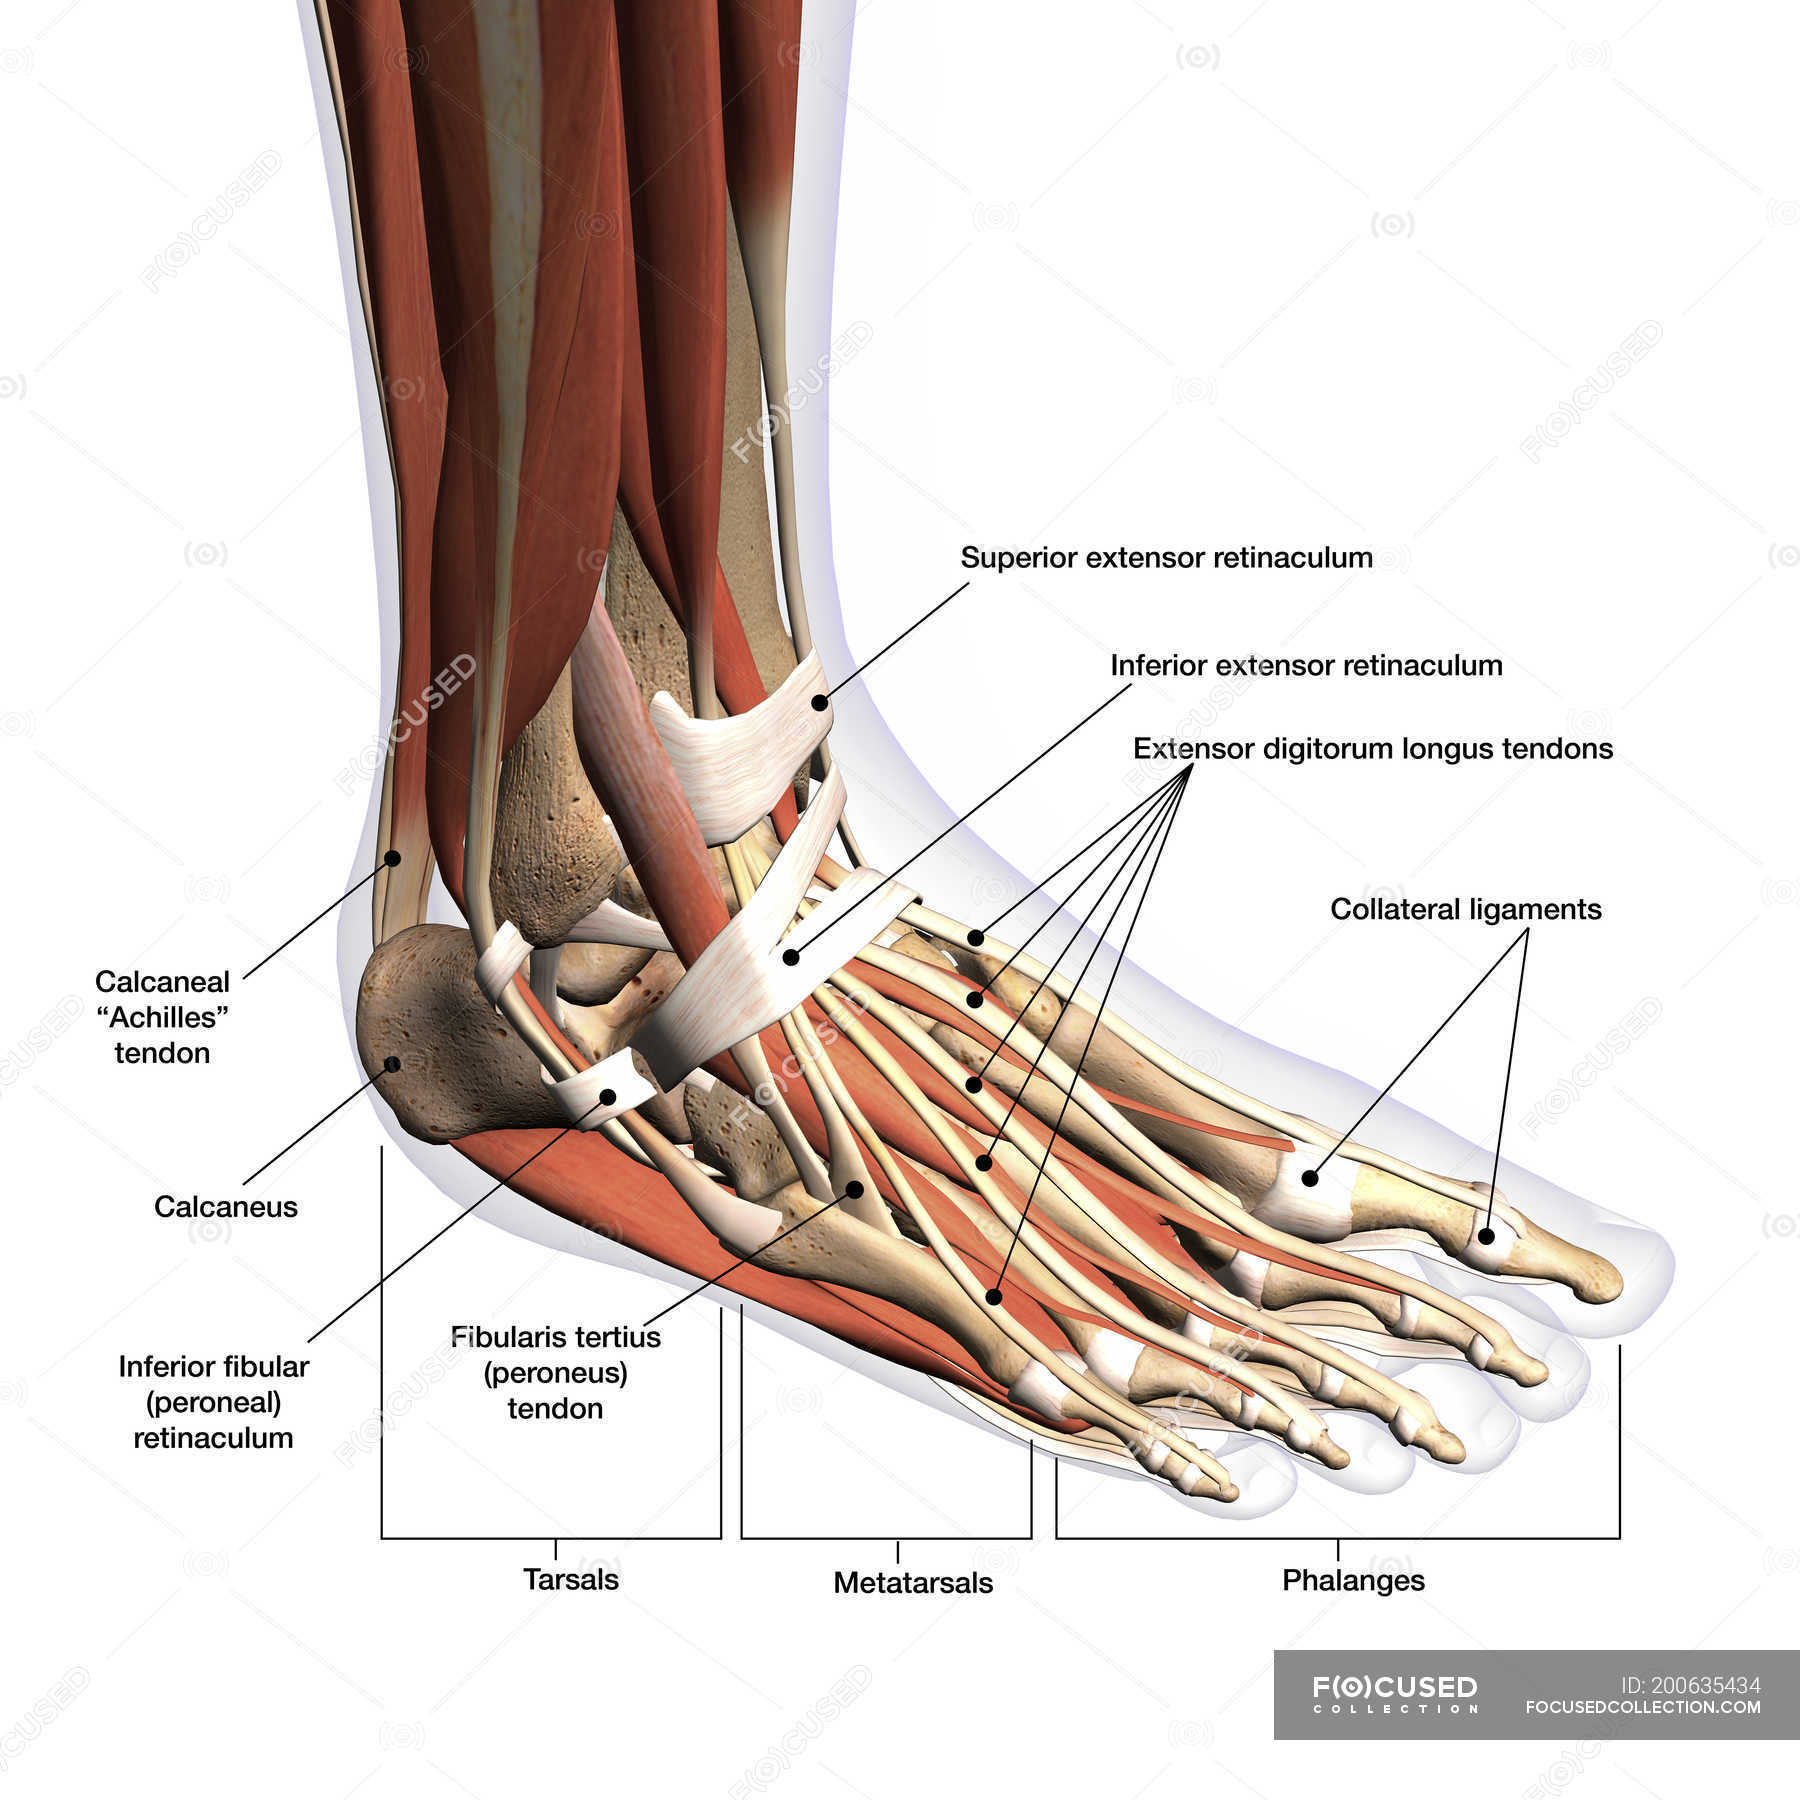 Focused 200635434 Stock Photo Anatomy Human Foot Labels White 